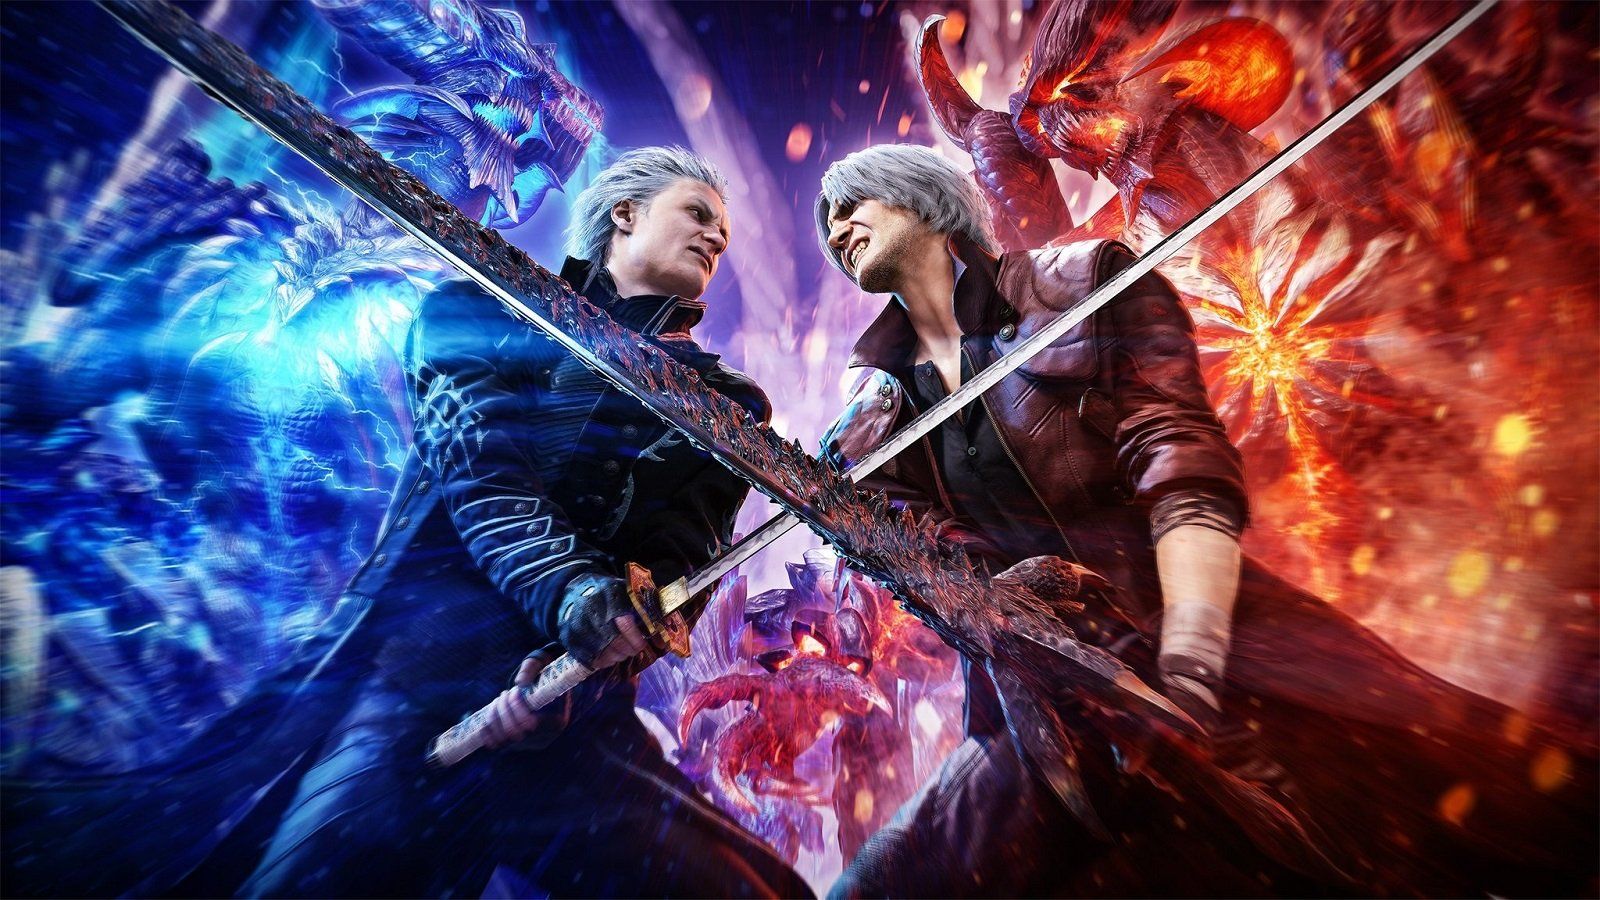 Devil May Cry 5 Dante and Vergil